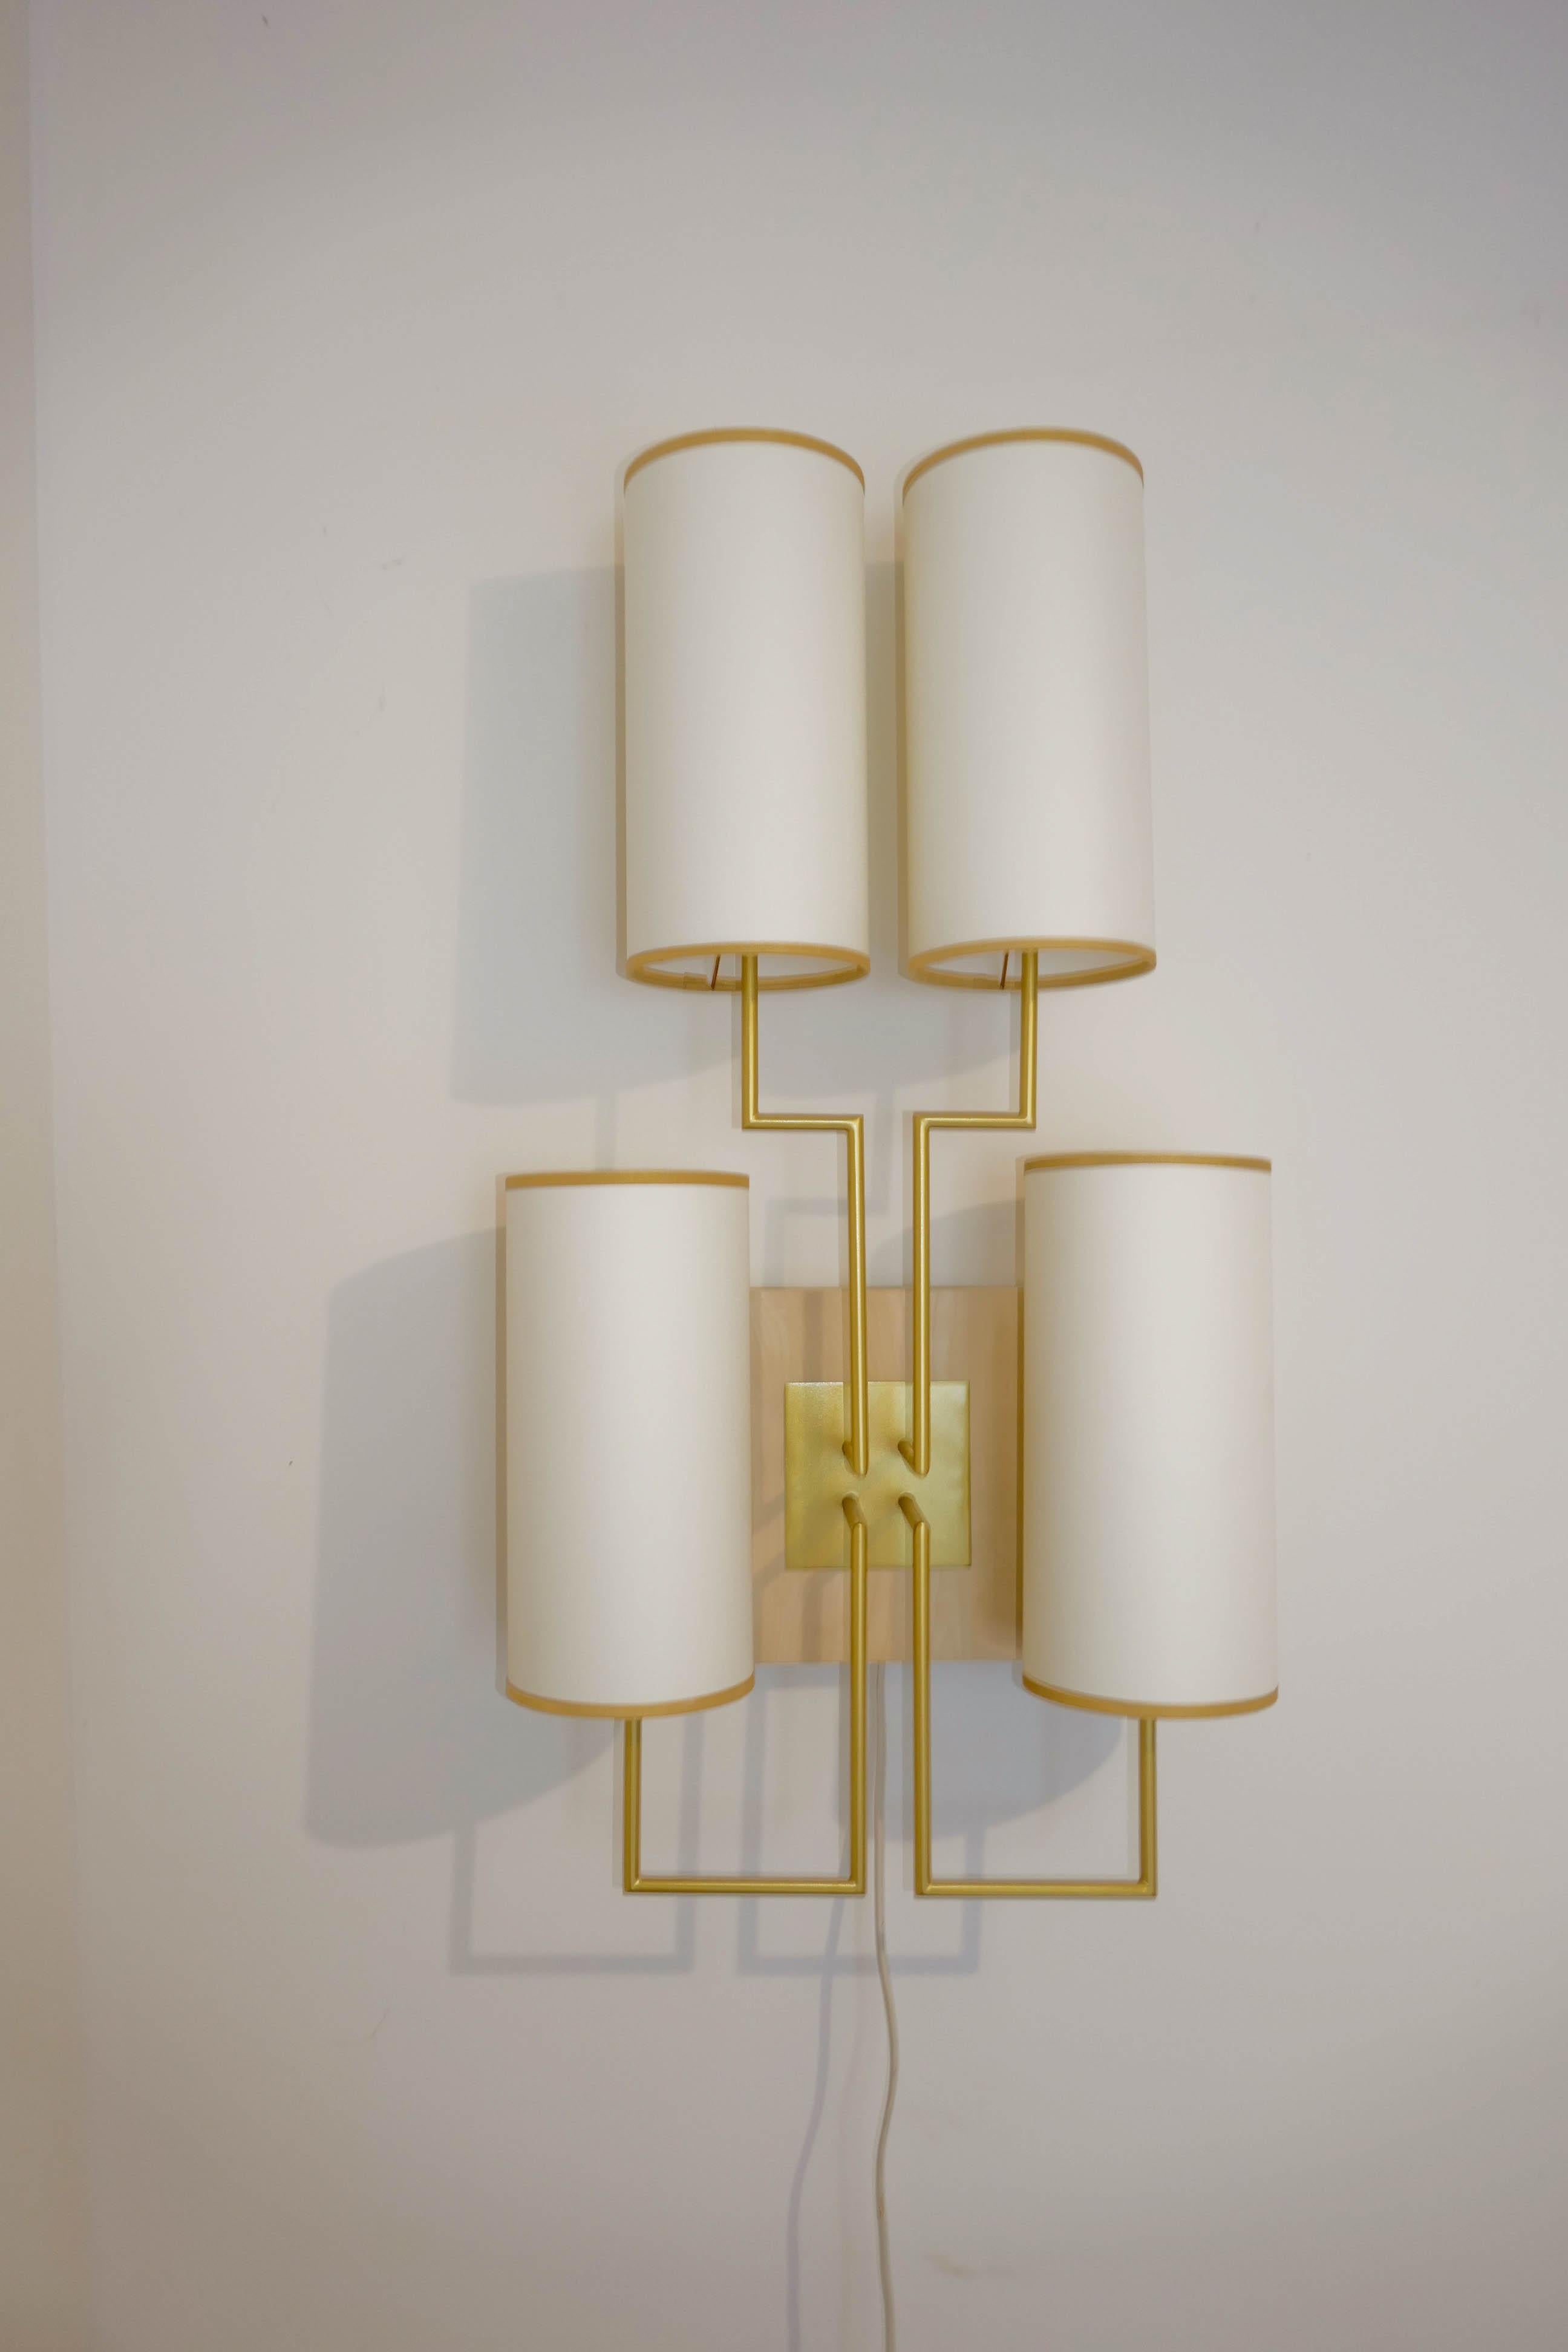 Wall lamp sconce in gold patina and white lamp shades, wooden baze in chestnut. Four lampshade in white fabric and golden braid.